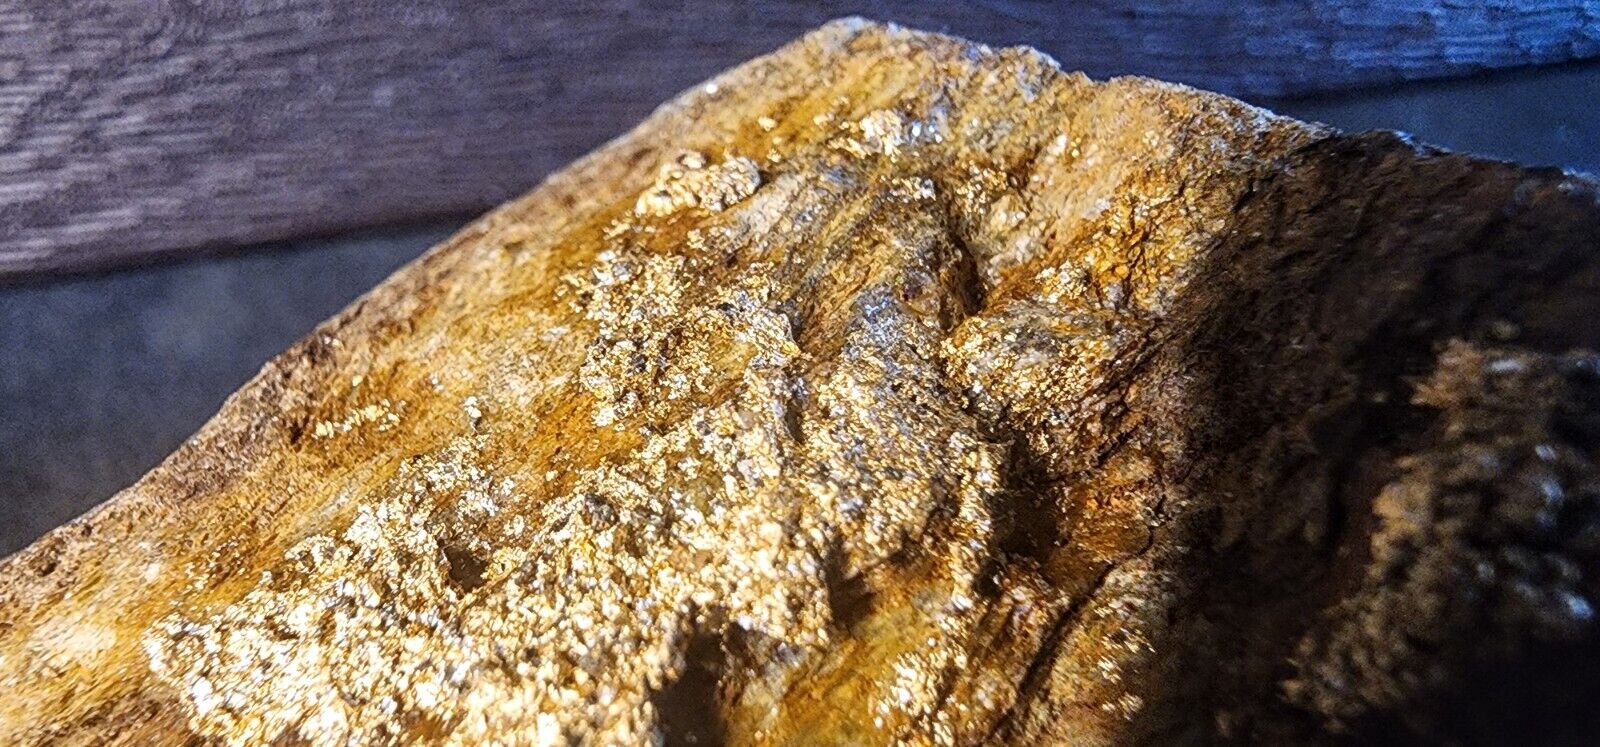 Gold Ore Specimen 74.9g From Ontario Crystalline Gold 3677 50% Off Was $229